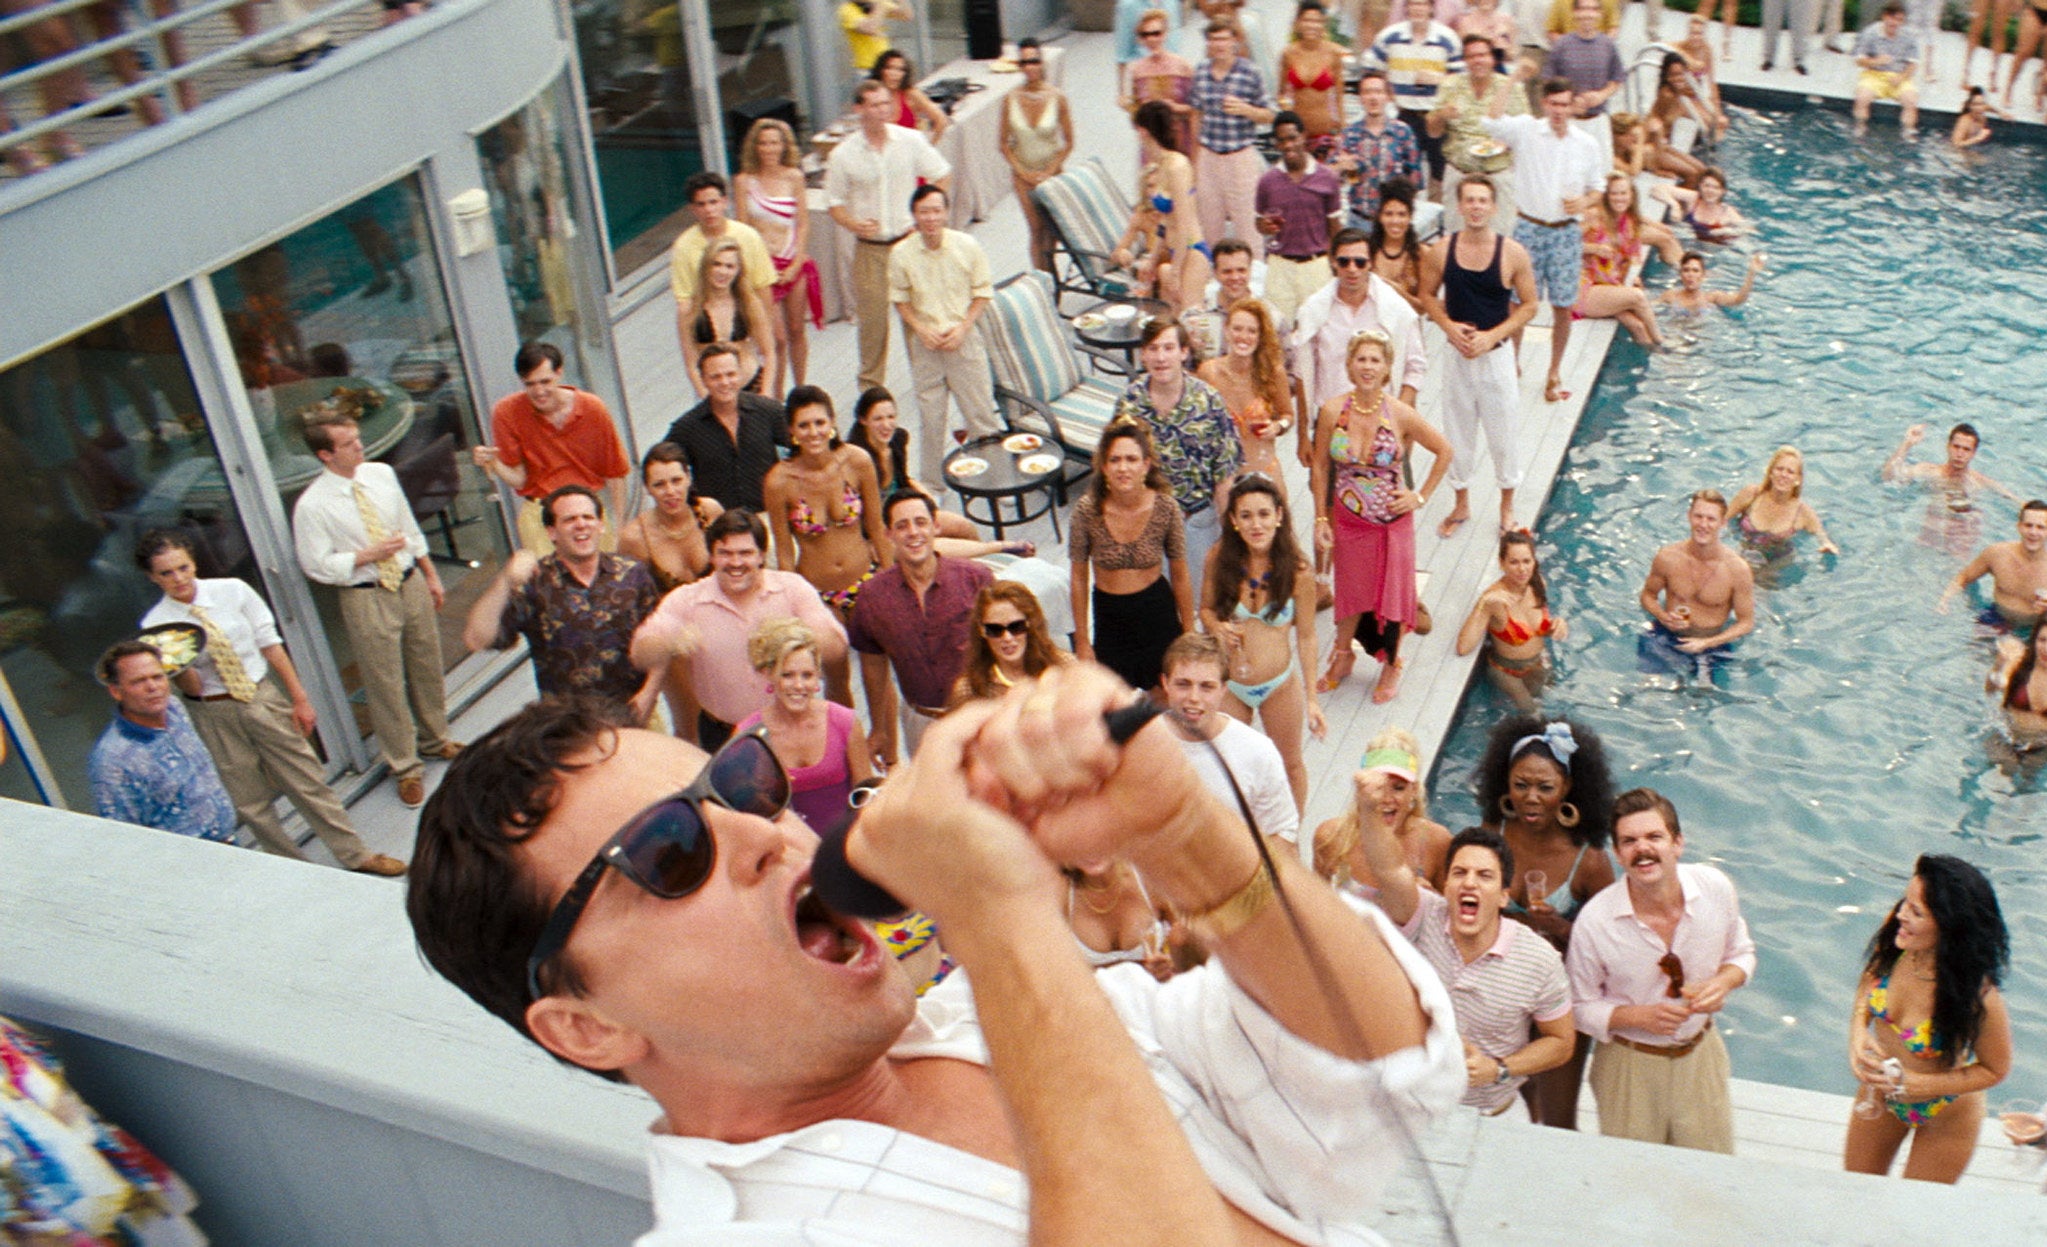 Leonardo DiCaprio shouts into a microphone at a pool party